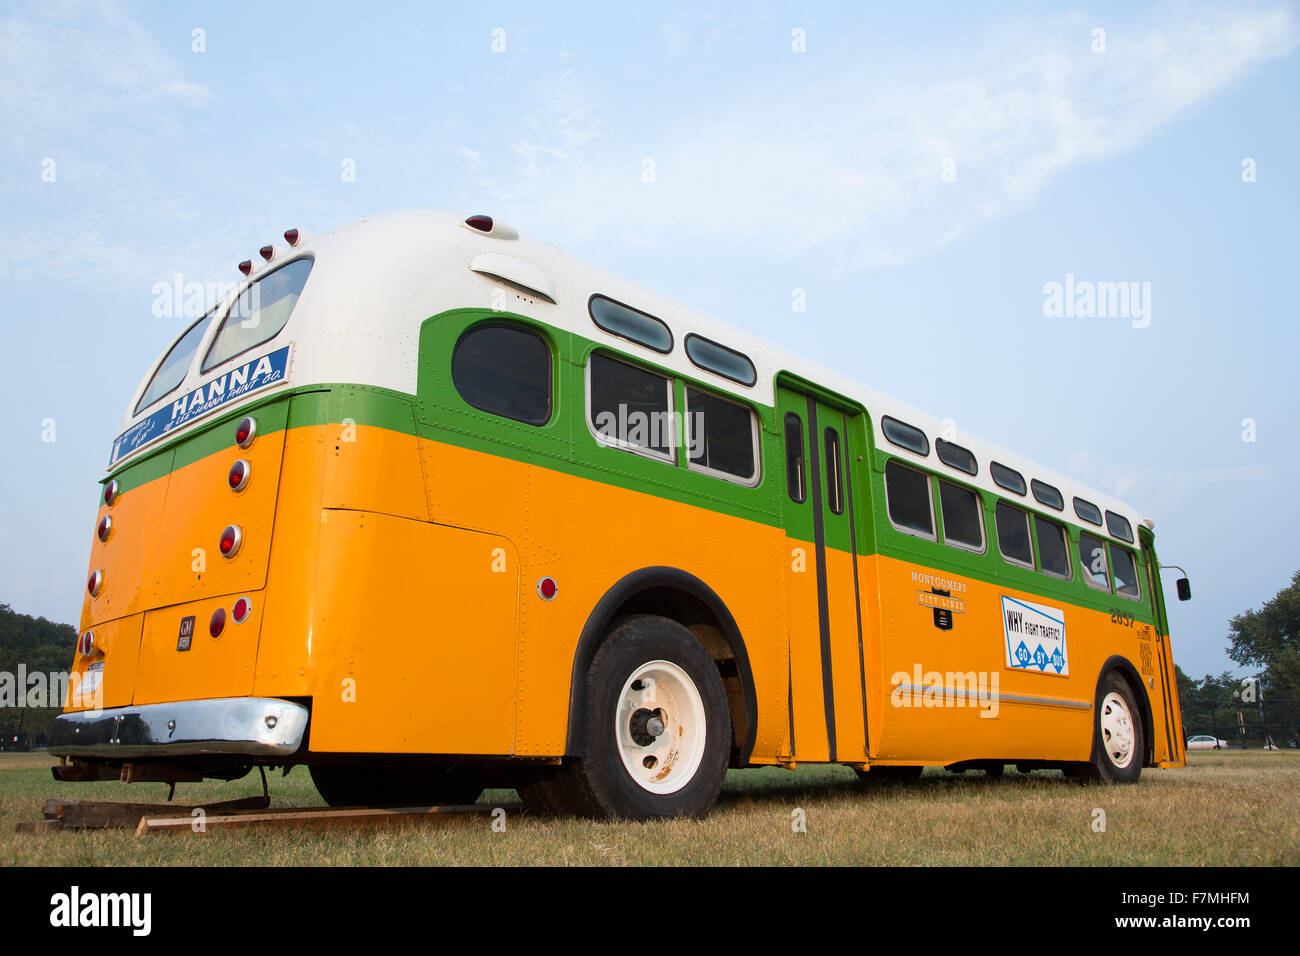 Restored bus Rosa Parks sat in December 1, 1955 from Montgomery Alabama on Cleveland Avenue, is seen in  Washington, D.C. National Mall, for the 50th Anniversary of the march on Washington and Martin Luther King's I Have A Dream Speech Stock Photo